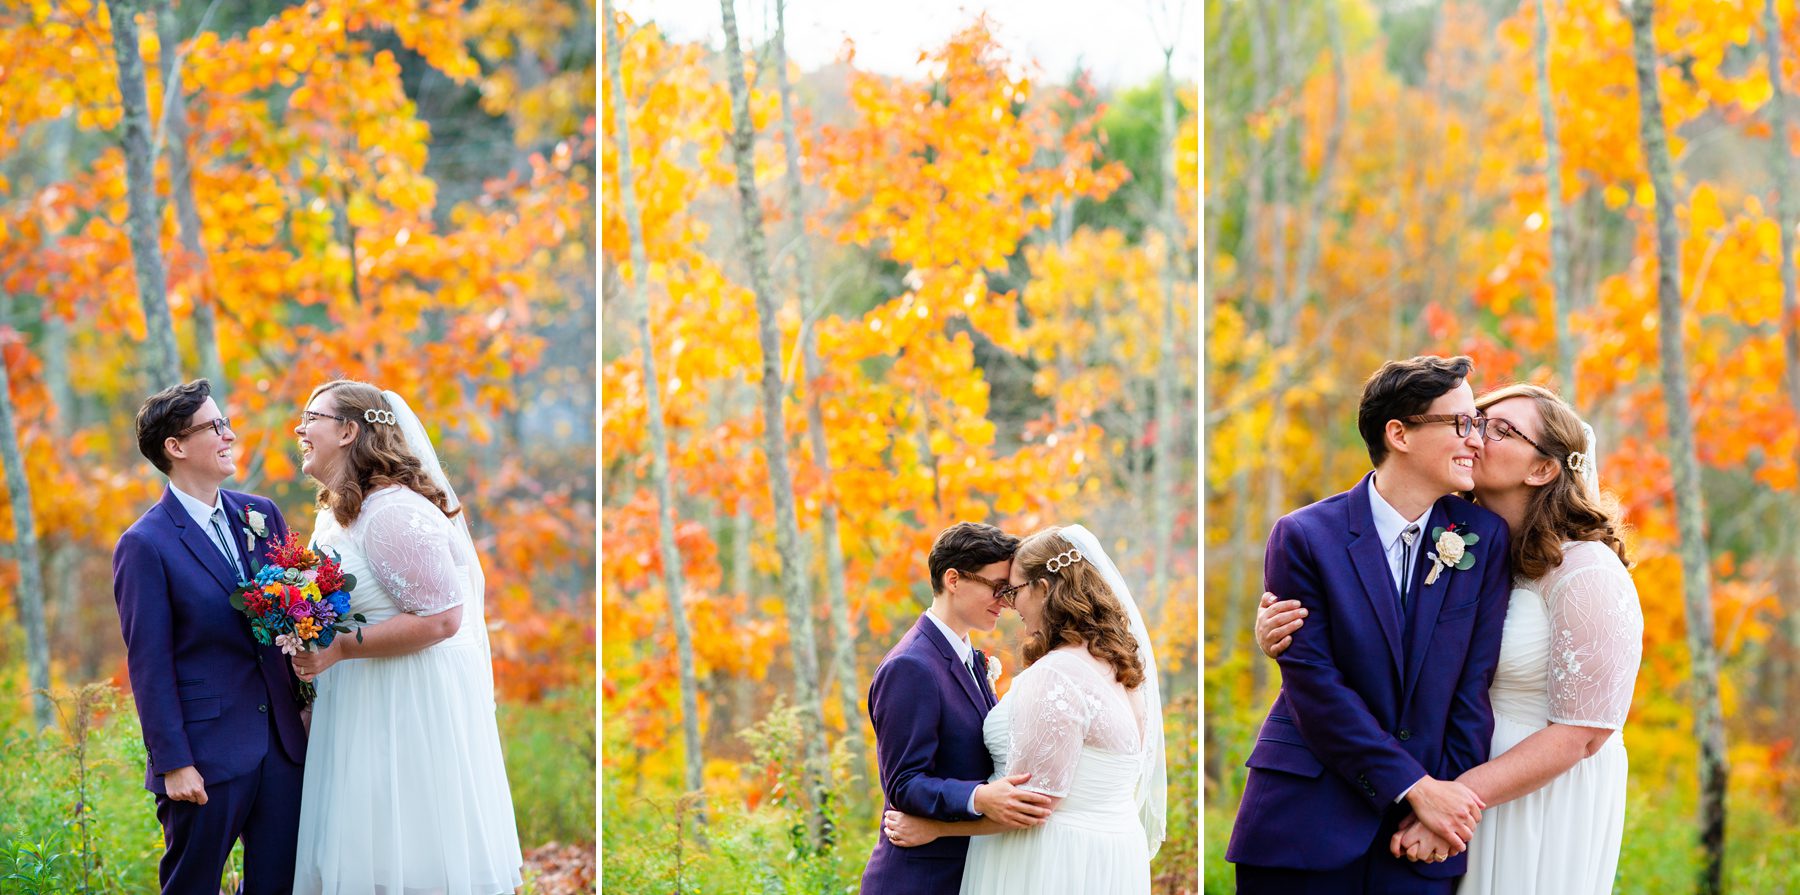 LGBTQ Wedding Photos with Fall Colors 